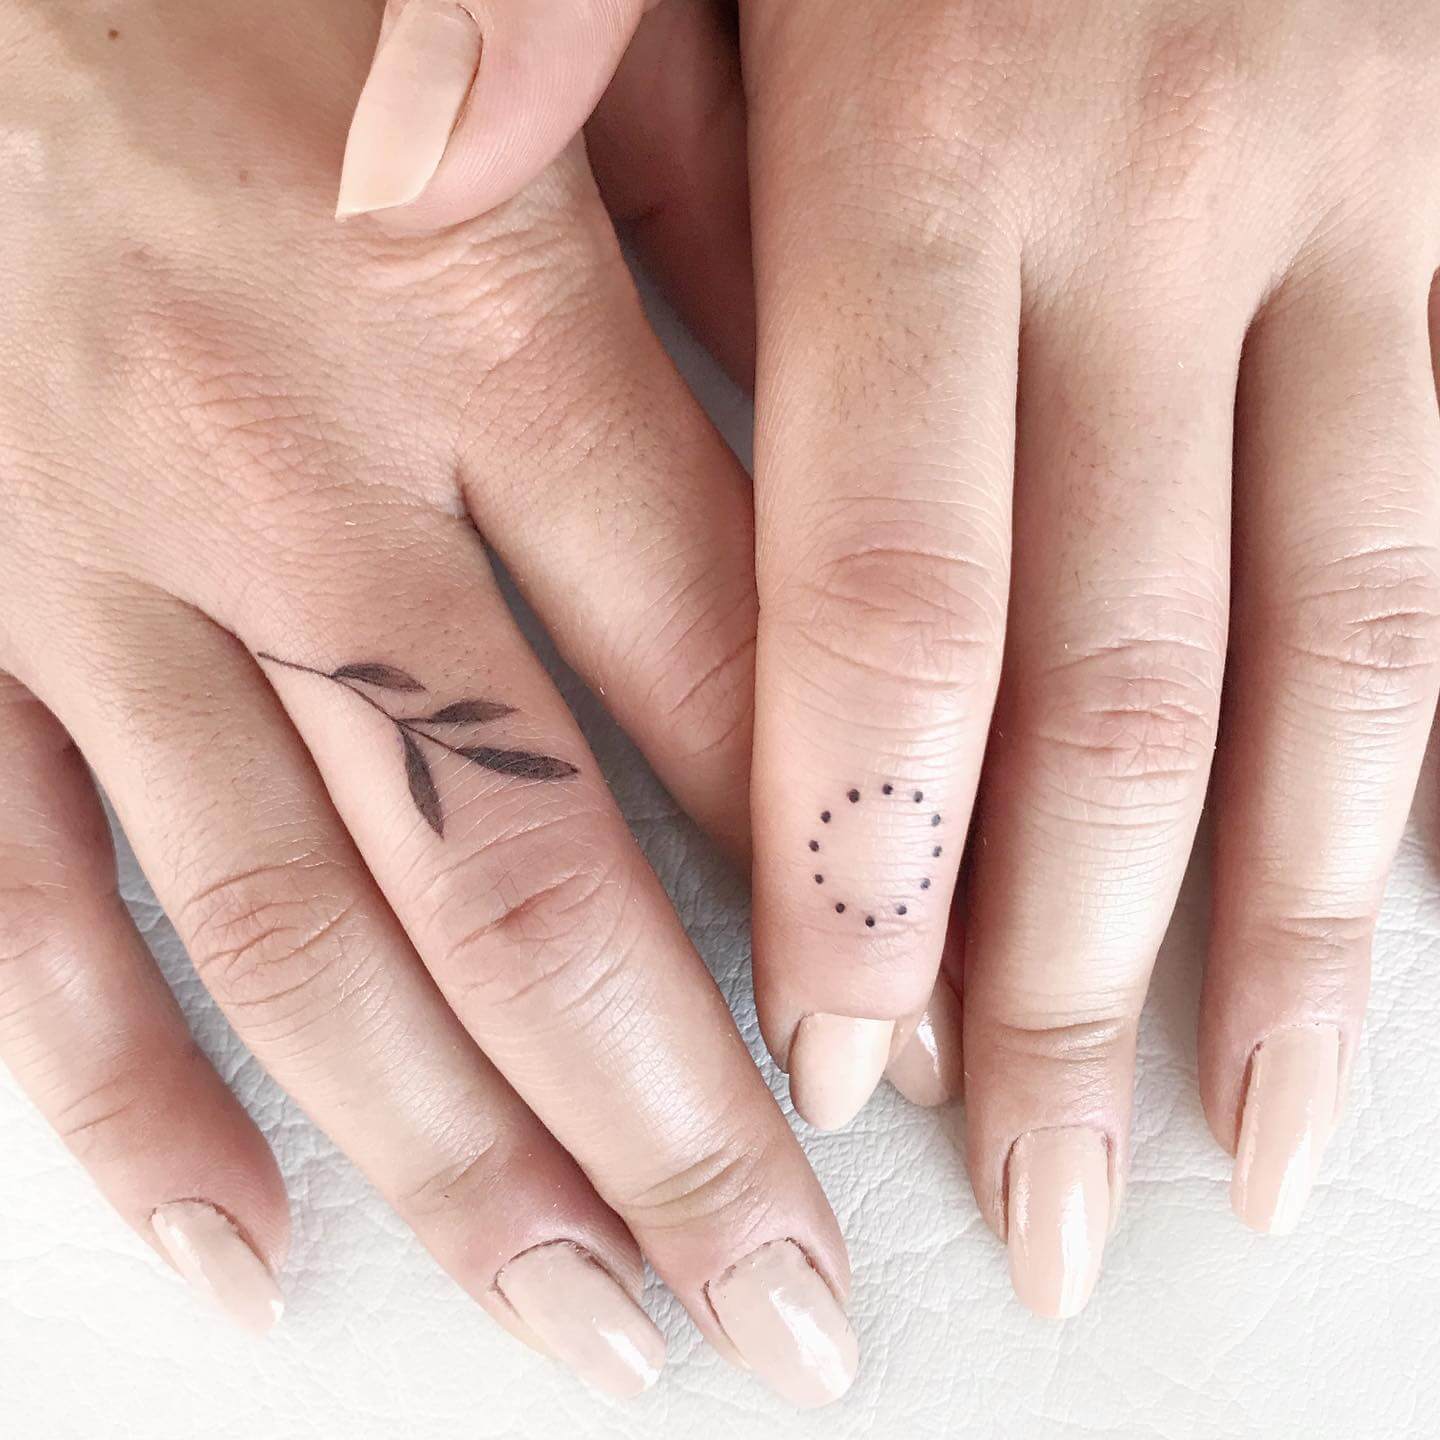 51 Top Amazing Ideas For Finger Tattoos | Finger tattoos, Hand and finger  tattoos, Finger tattoos fade